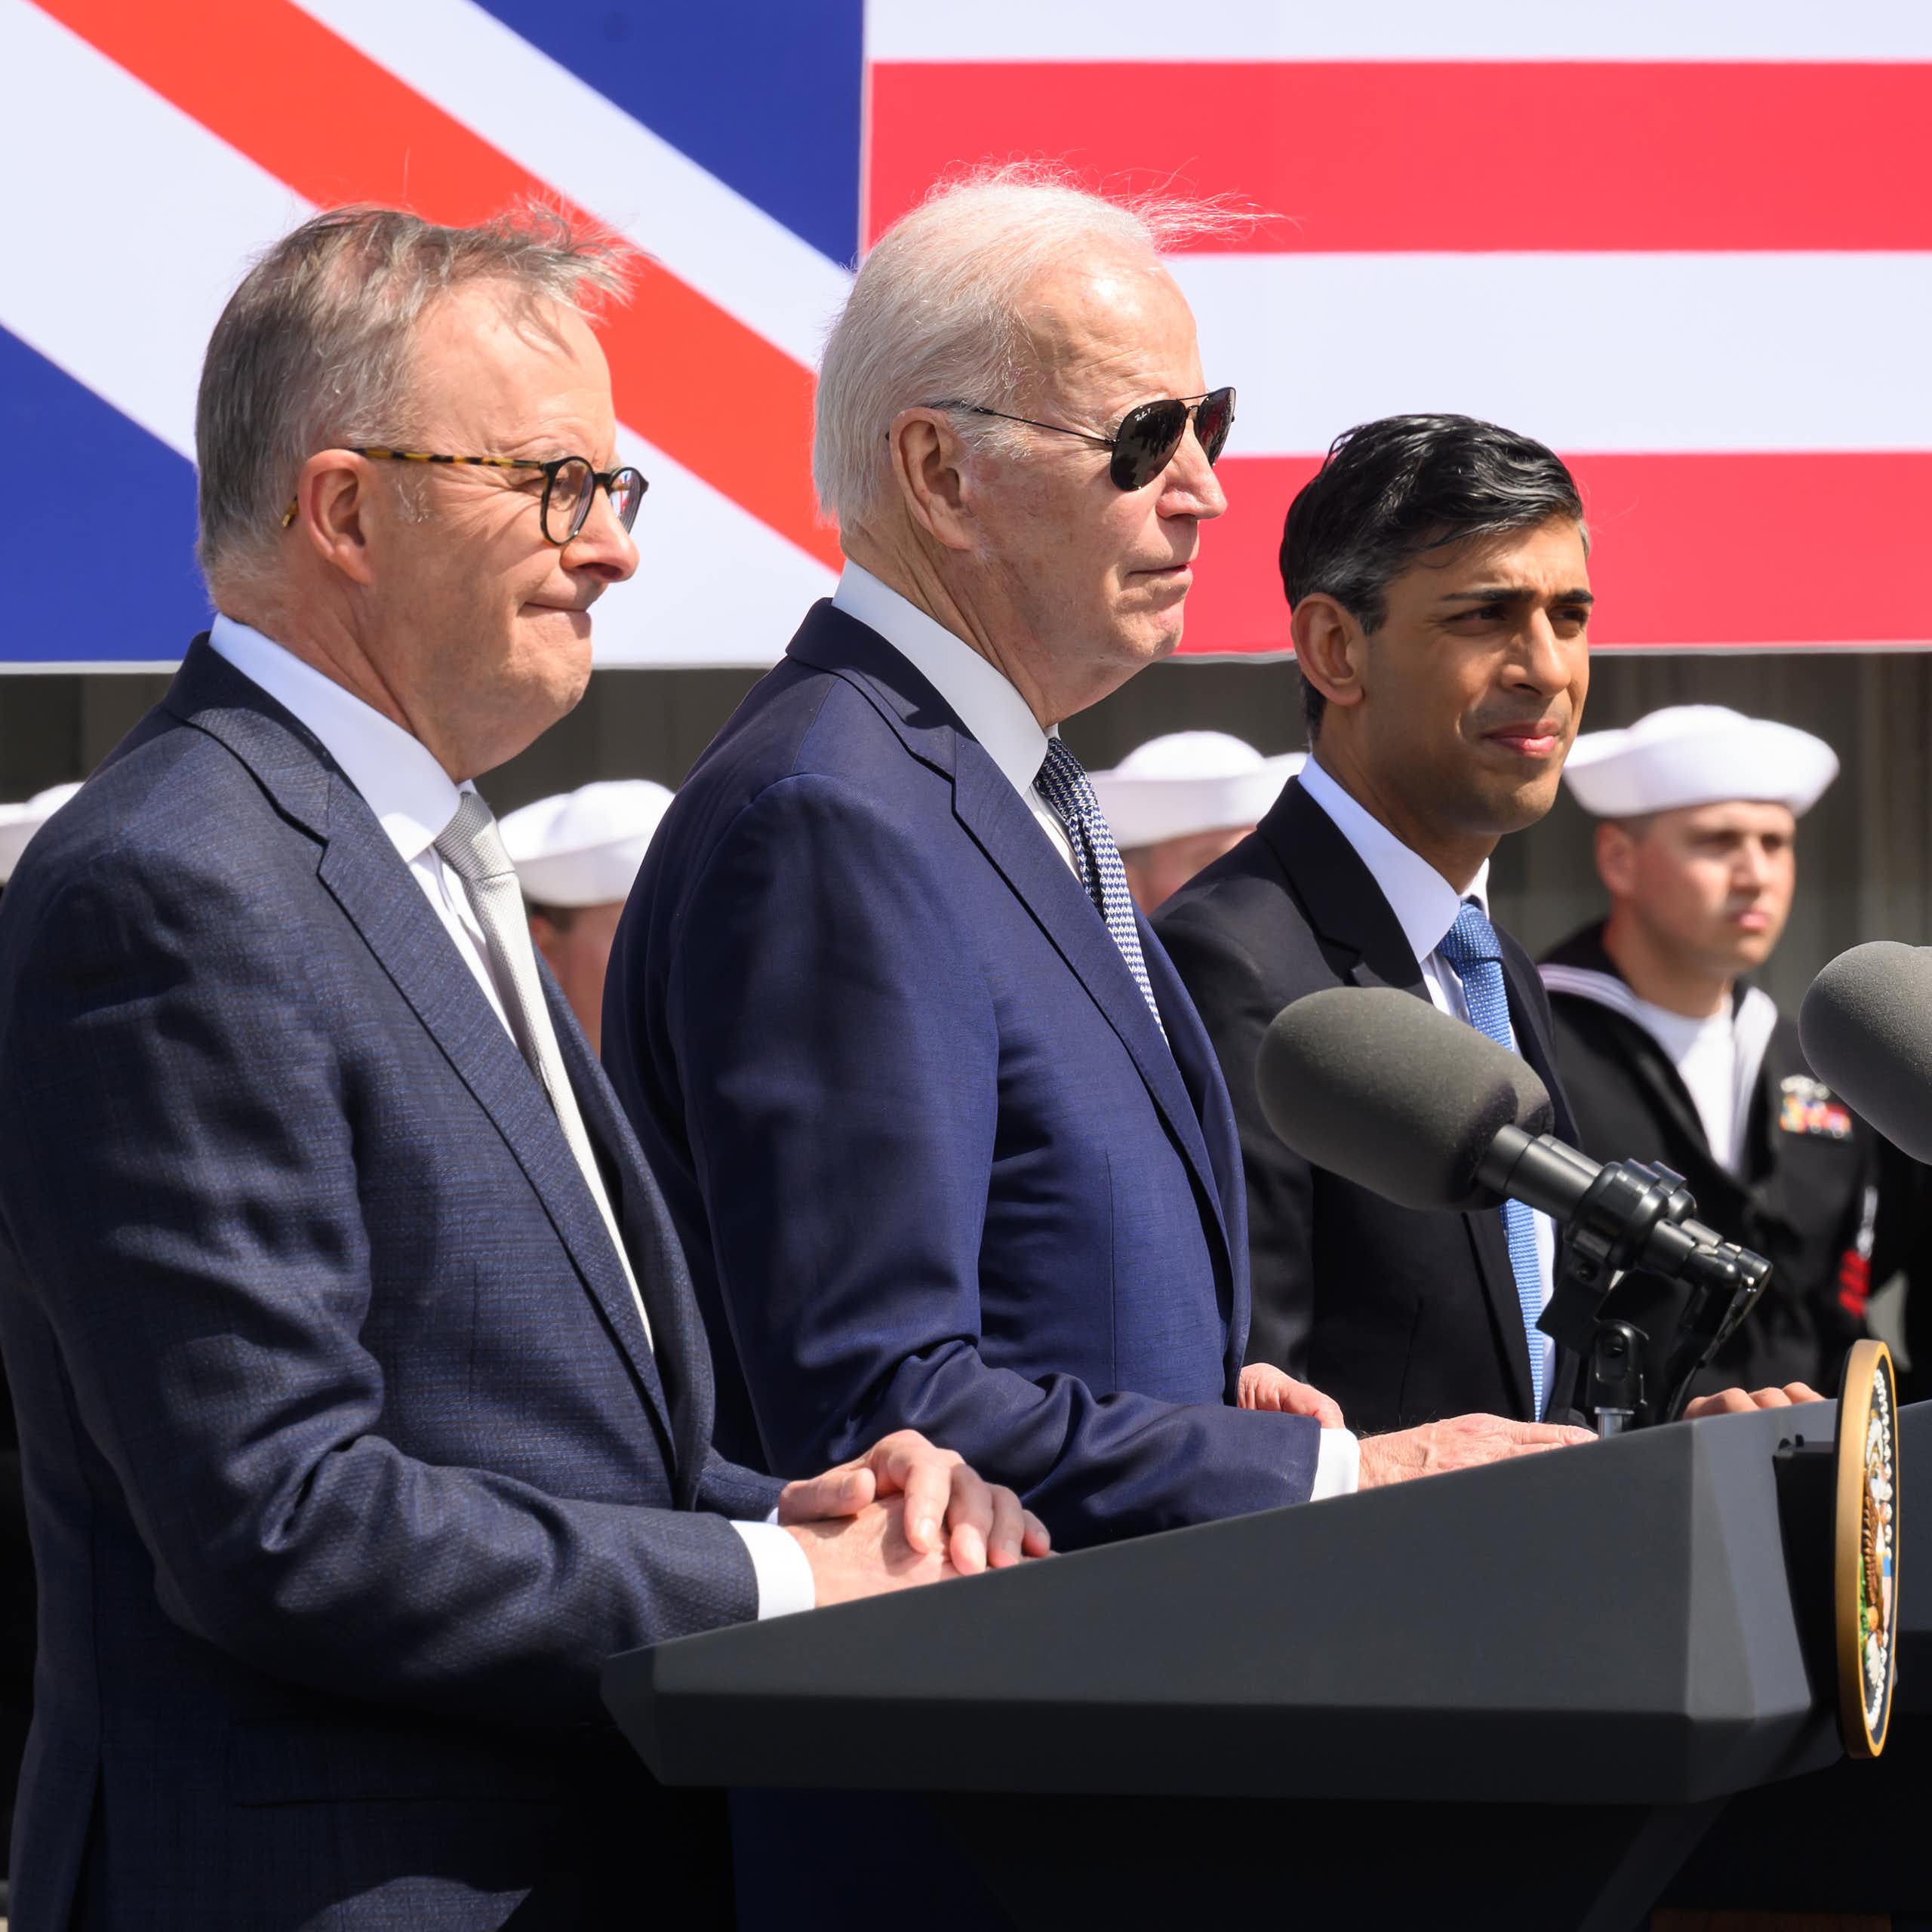 Australian Prime Minister Anthony Albanese (L), US President Joe Biden (C) and British Prime Minister Rishi Sunak (R) stand in front of podiums ahead of a press conference.